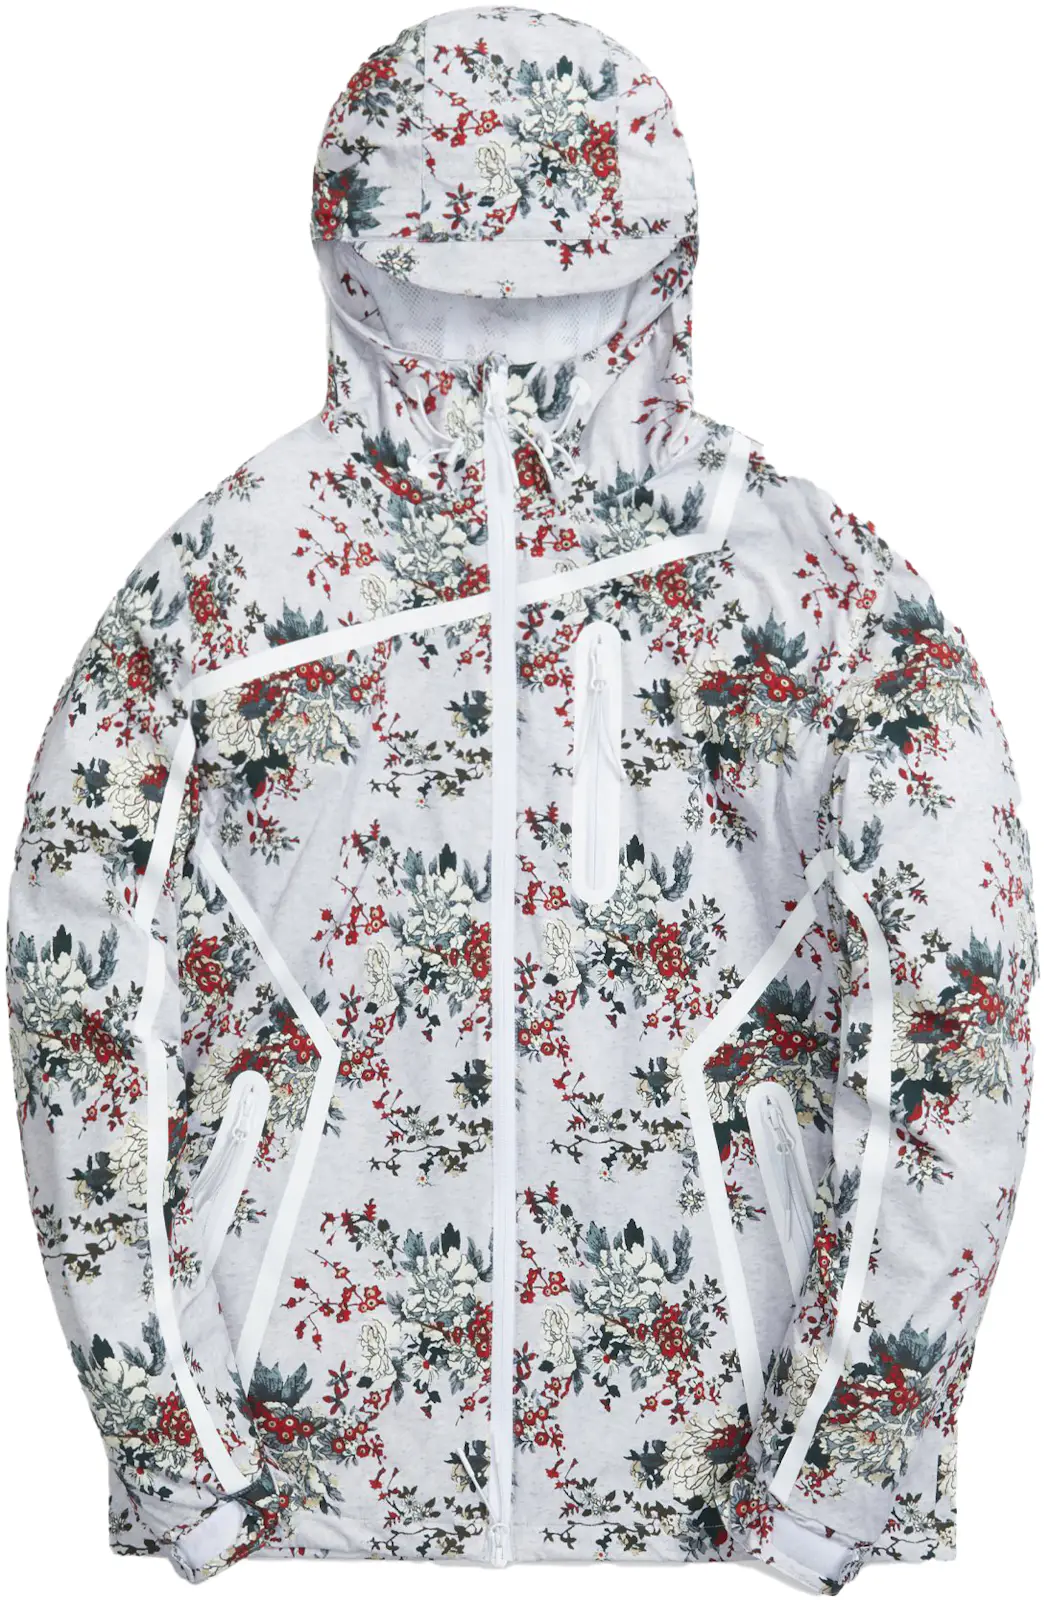 Kith Tapestry Floral Madison Jacket Light Heather Grey - SS21